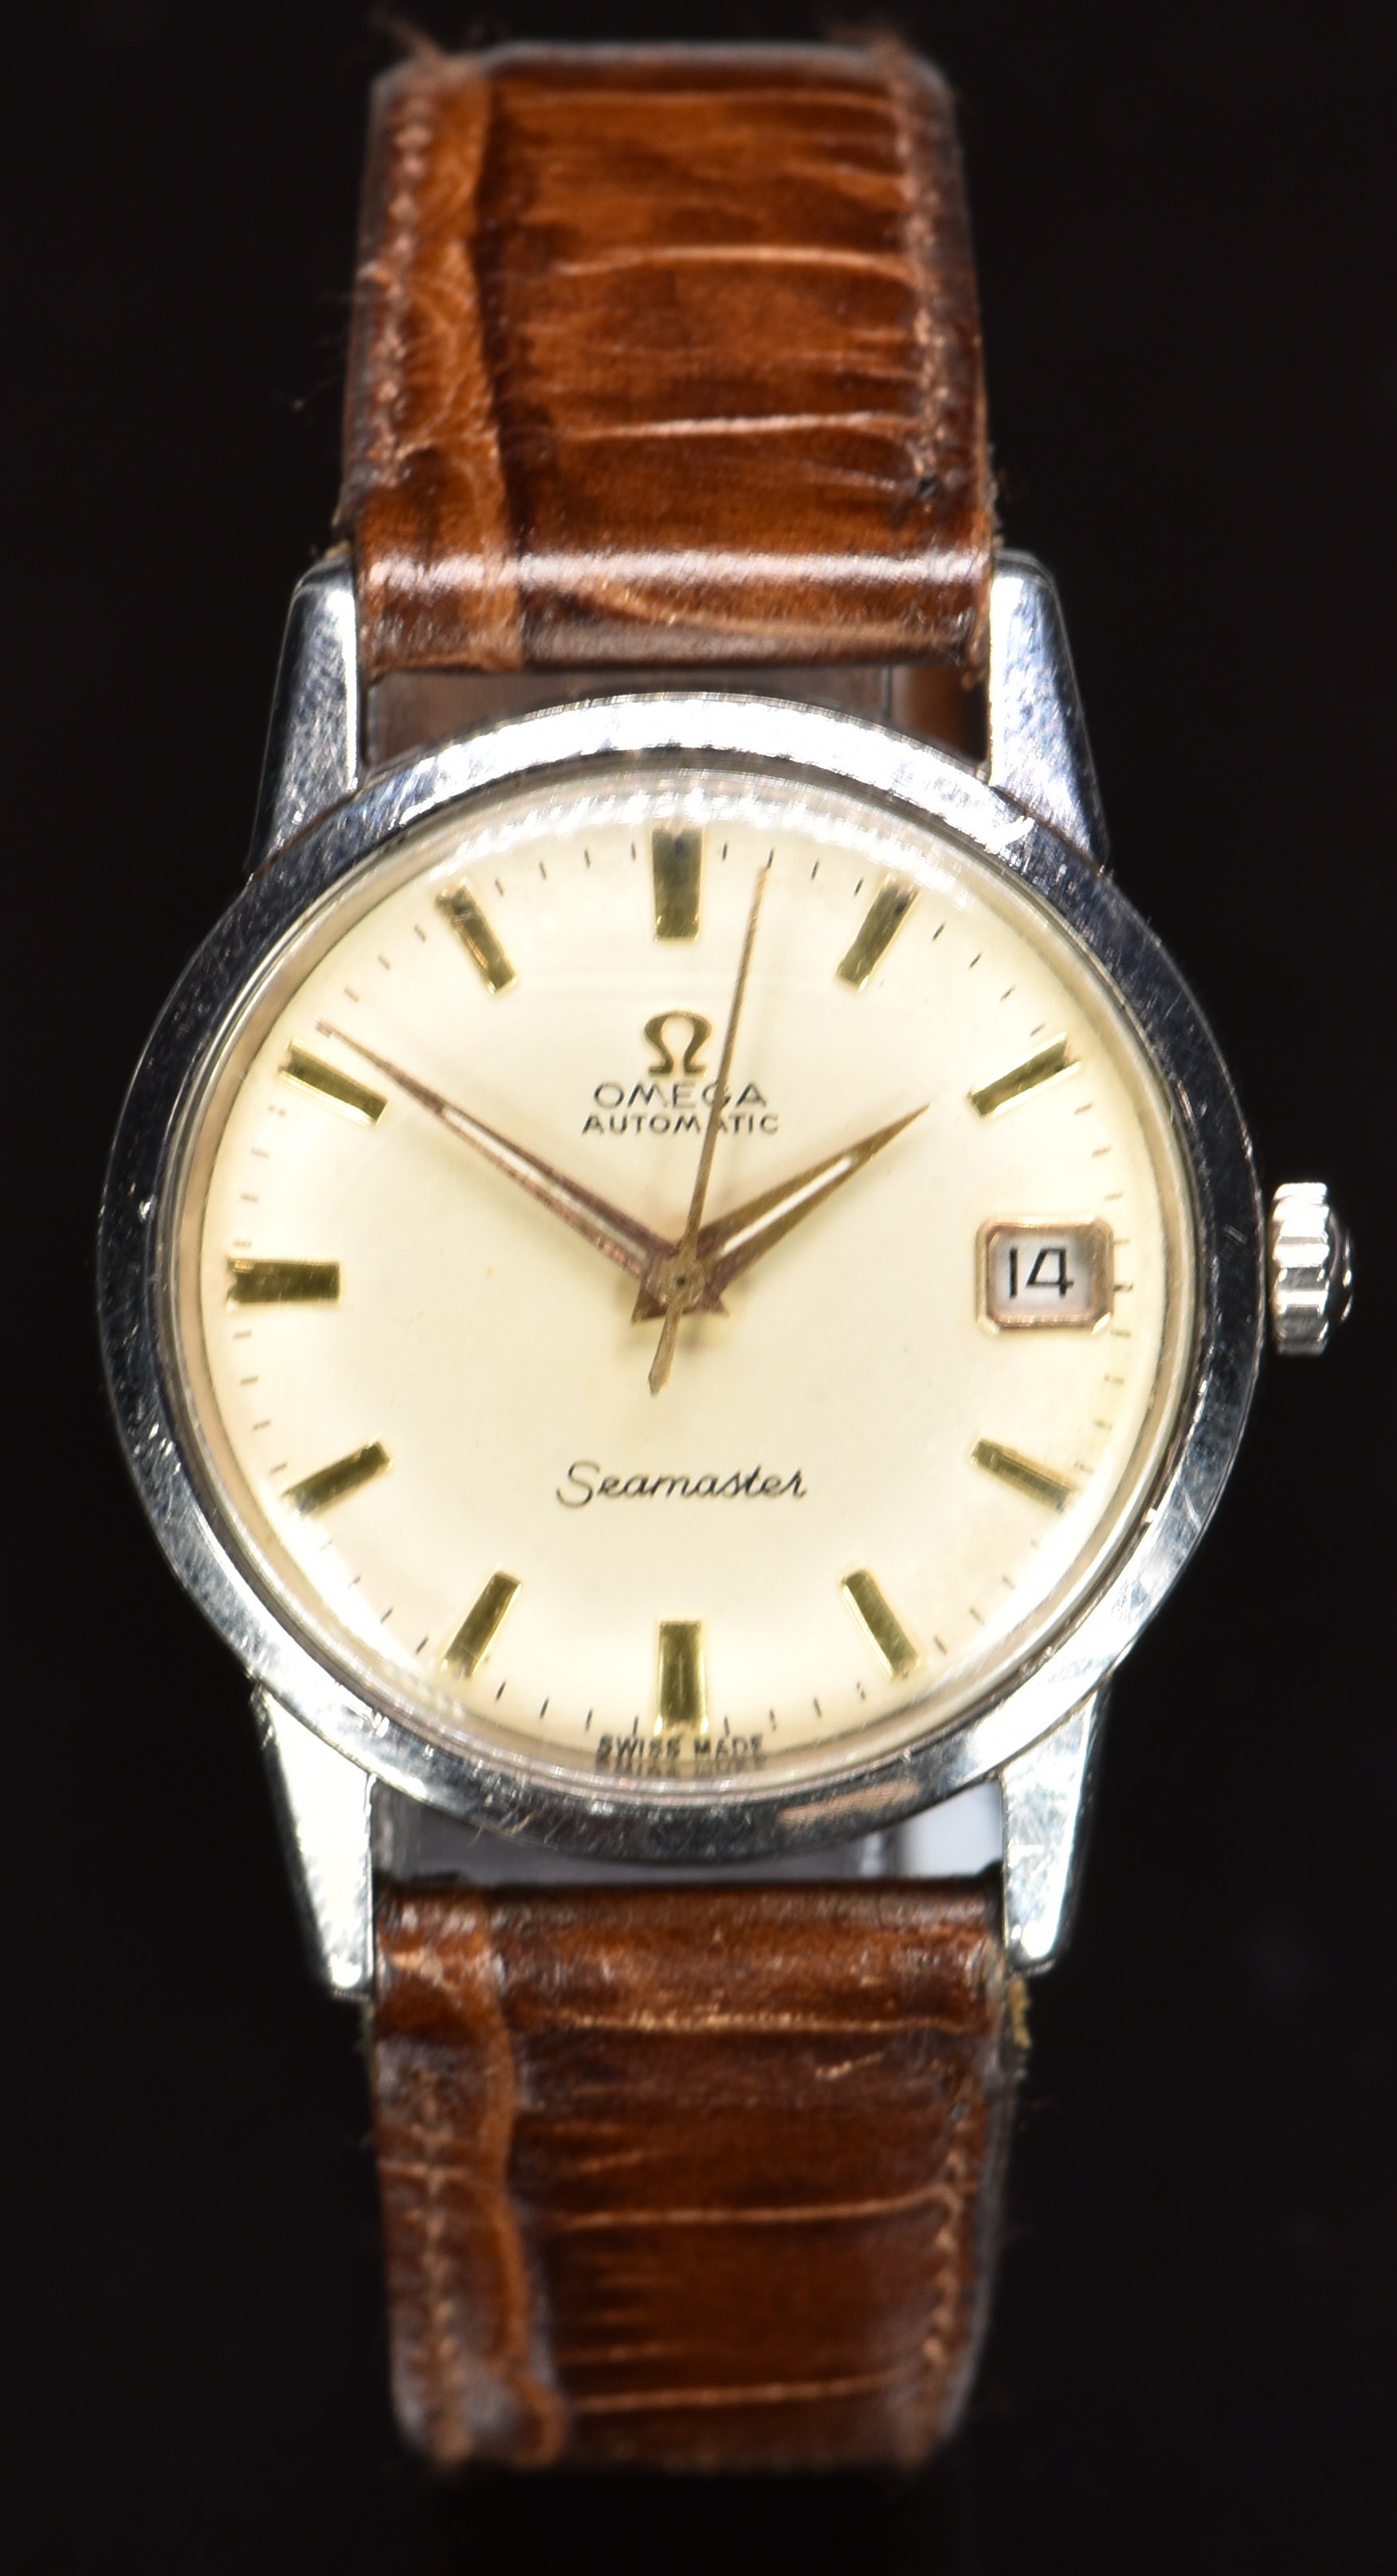 Omega Seamaster gentleman's automatic wristwatch with date aperture, luminous and gold hands, gold